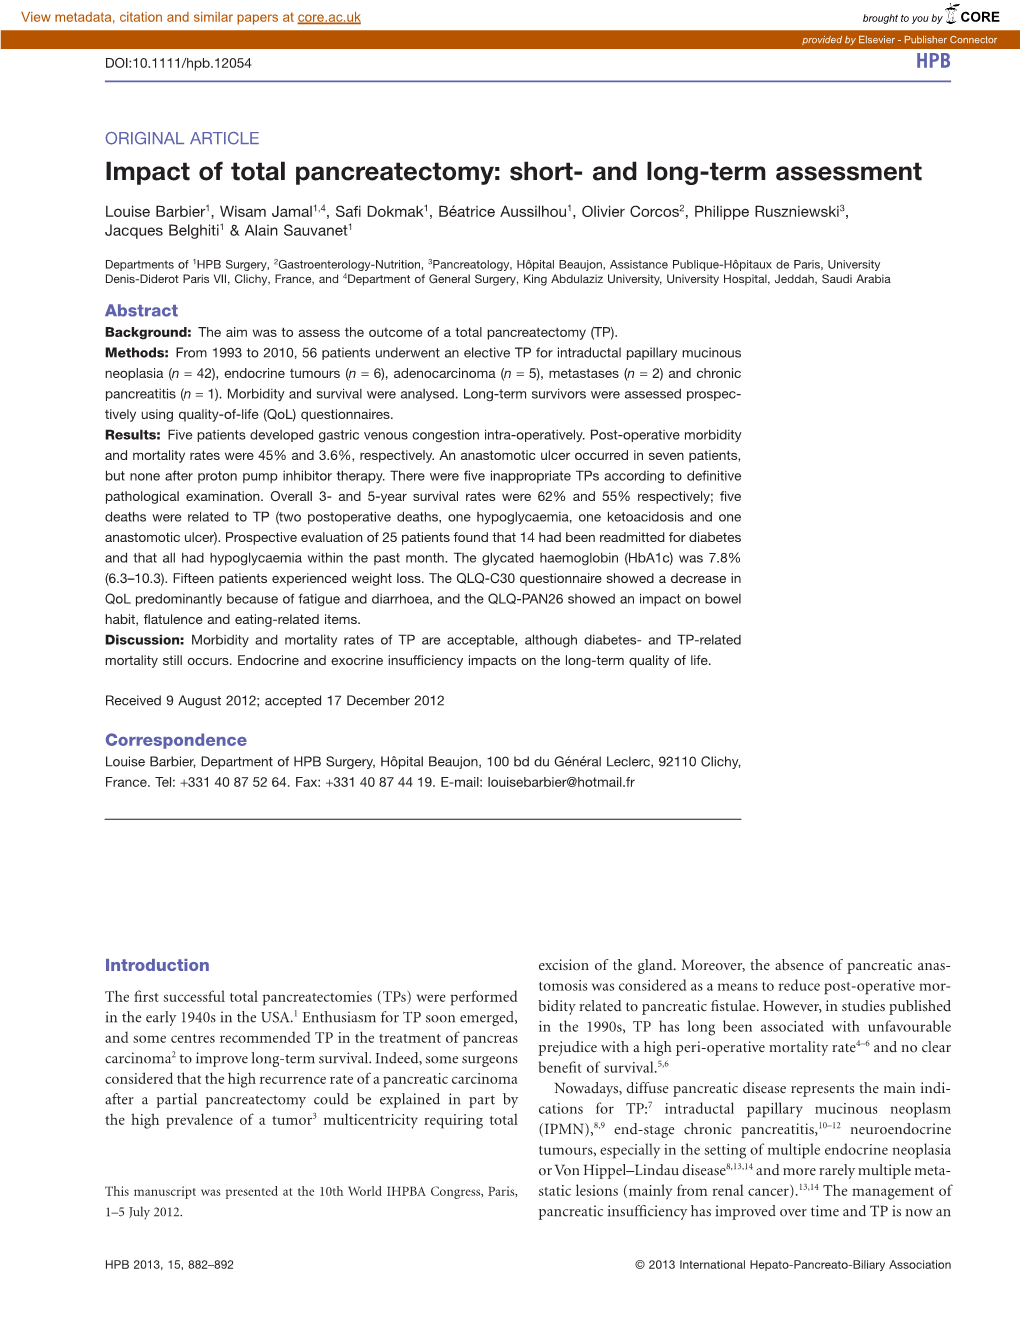 Impact of Total Pancreatectomy: Short- and Long-Term Assessment